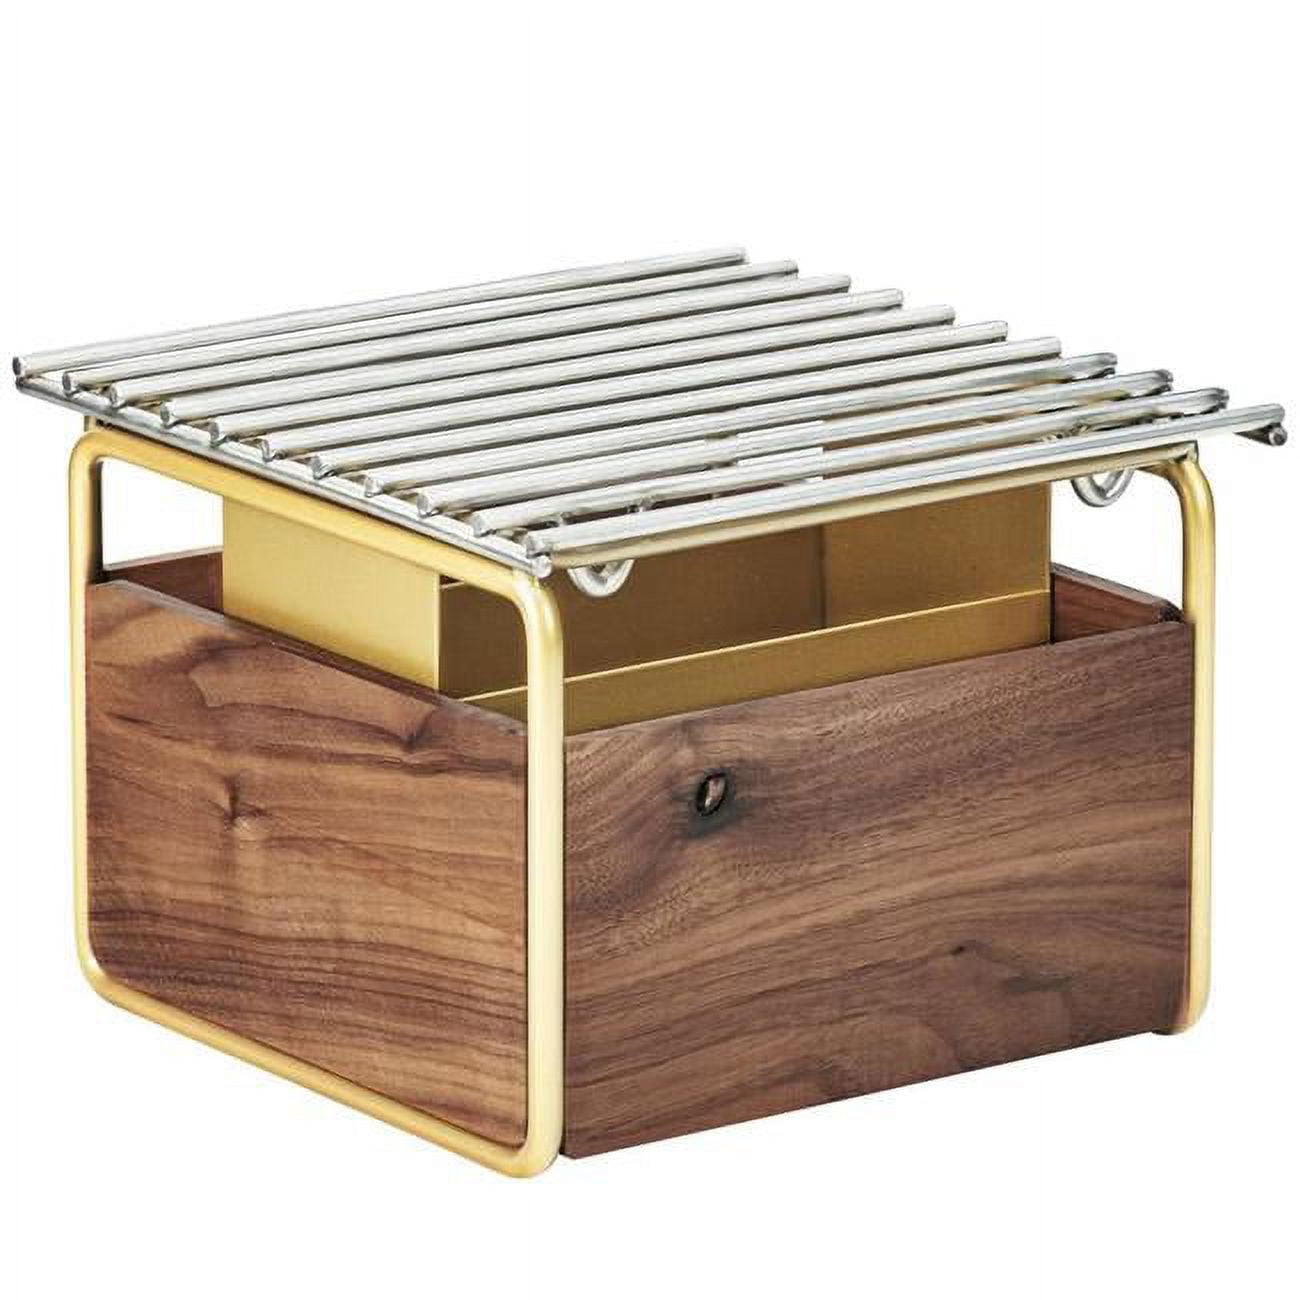 Picture of Cal Mil 3711-46 Mid-Century Square Chafer Alternative, Brass - 12 x 12 x 7.25 in.